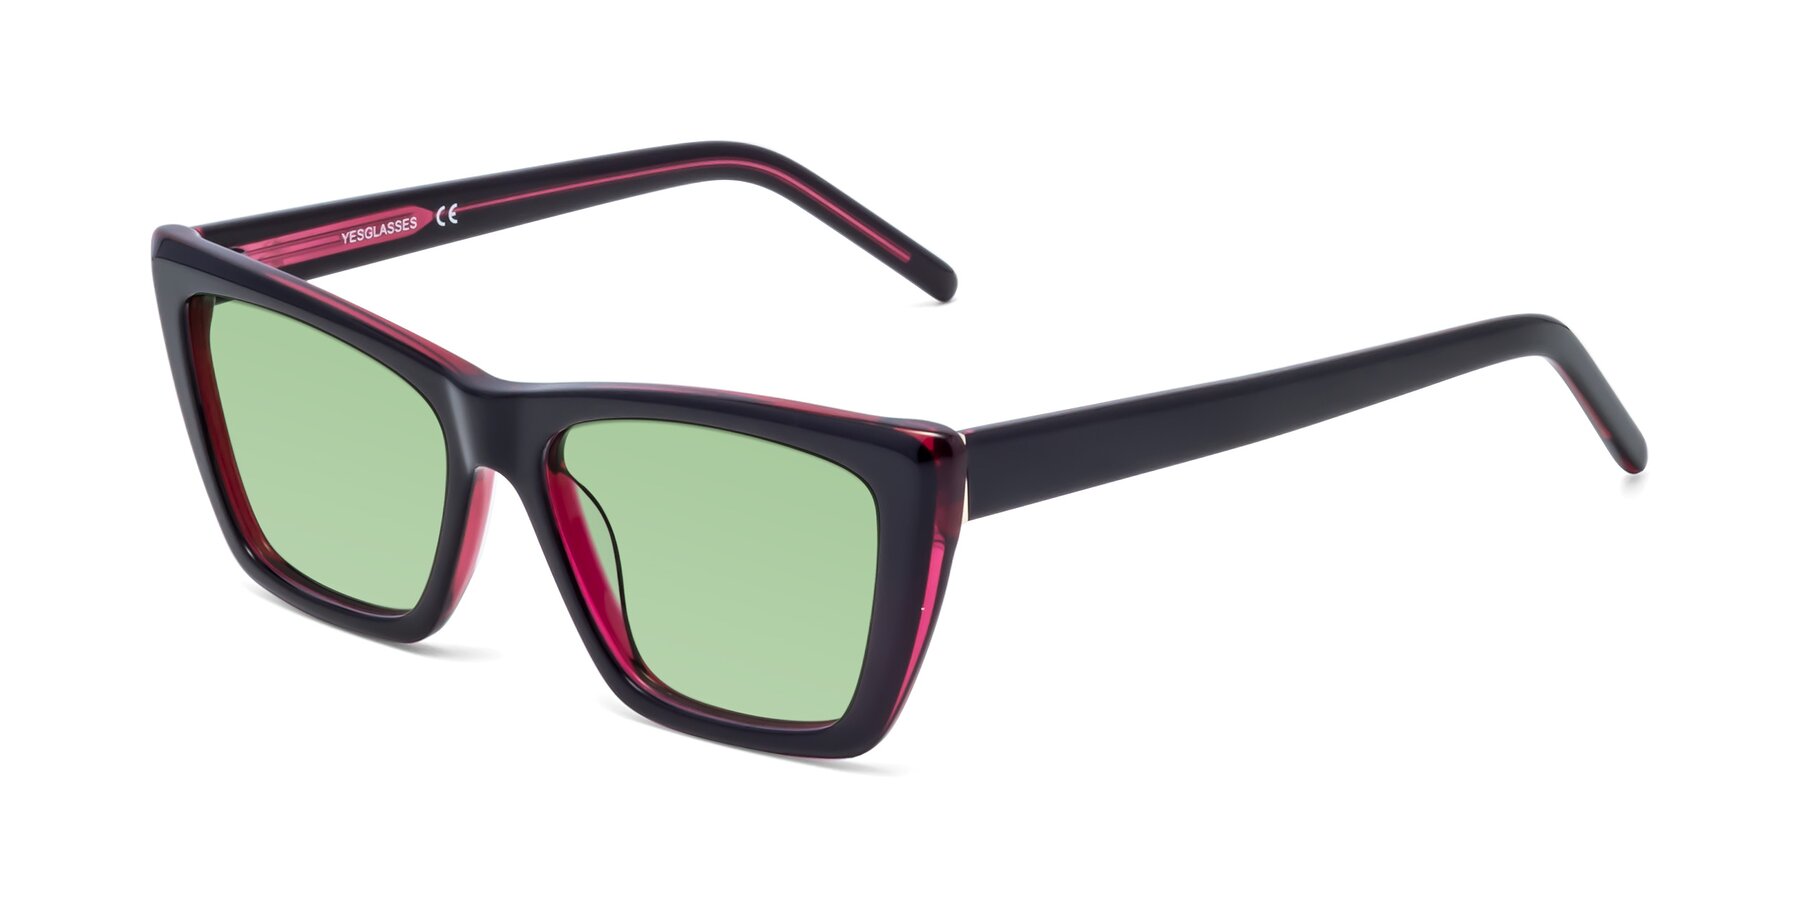 Angle of 1494 in Black-Wine with Medium Green Tinted Lenses